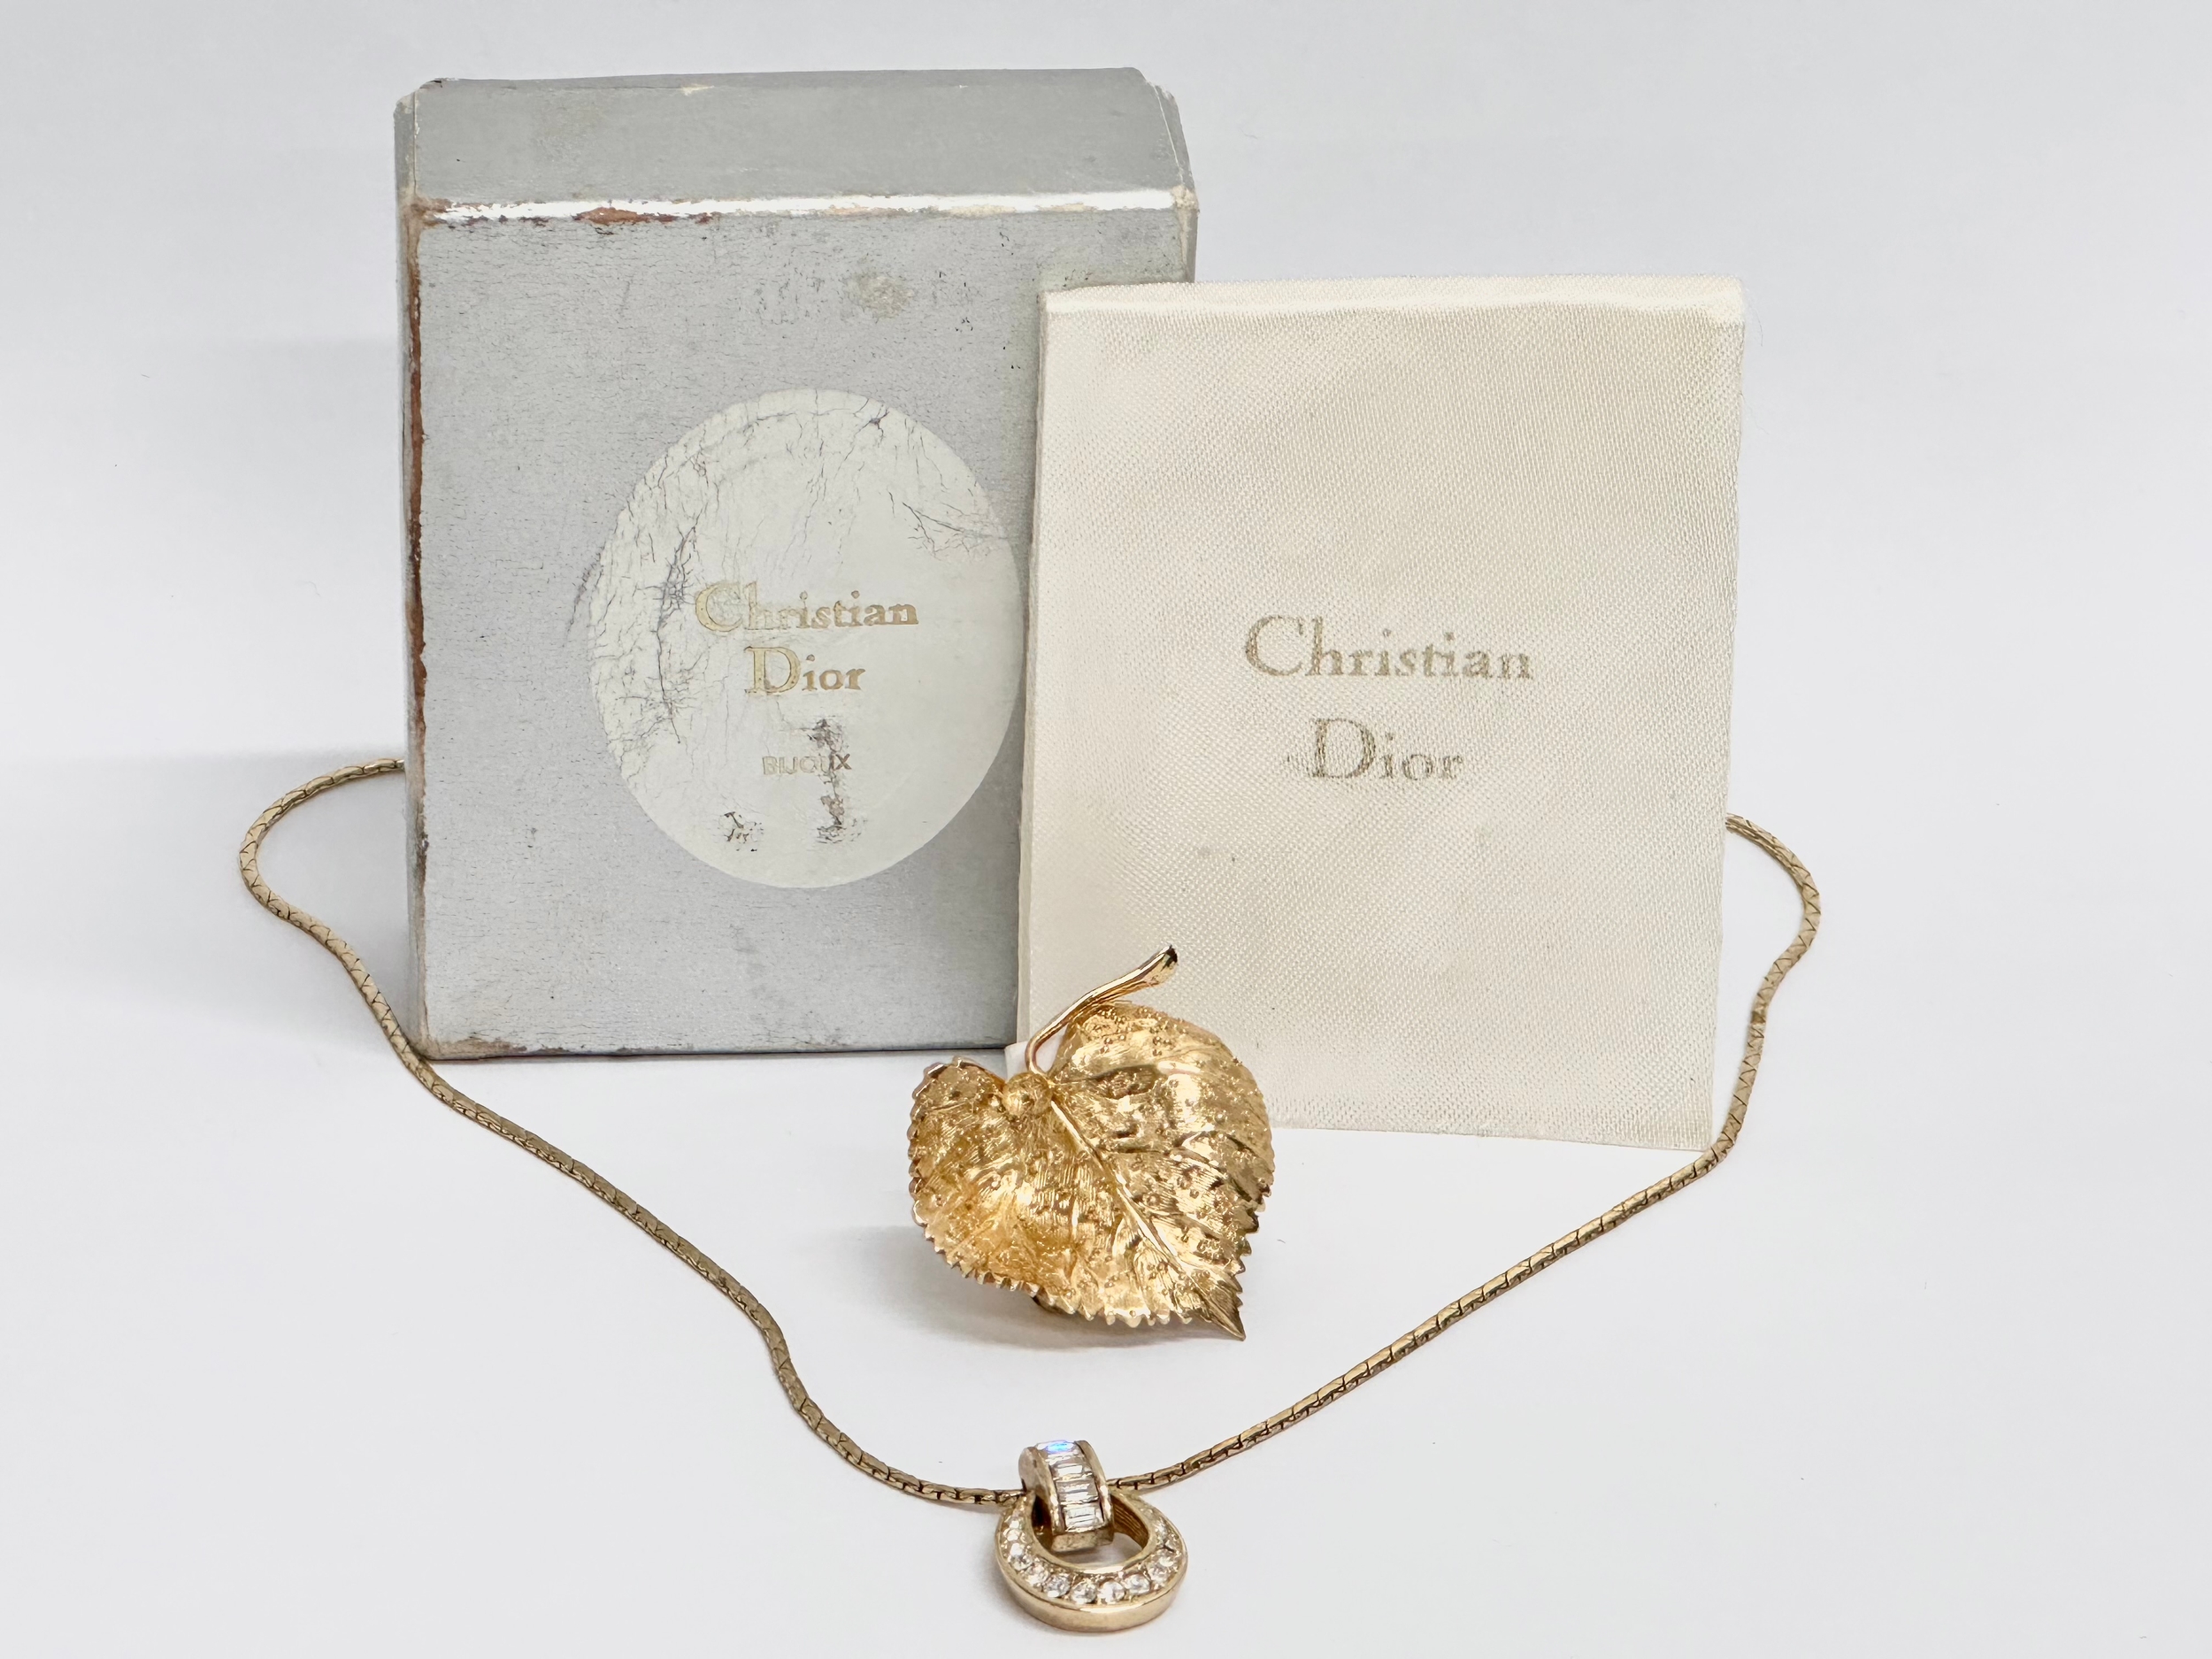 Christian Dior necklace and brooch with box.